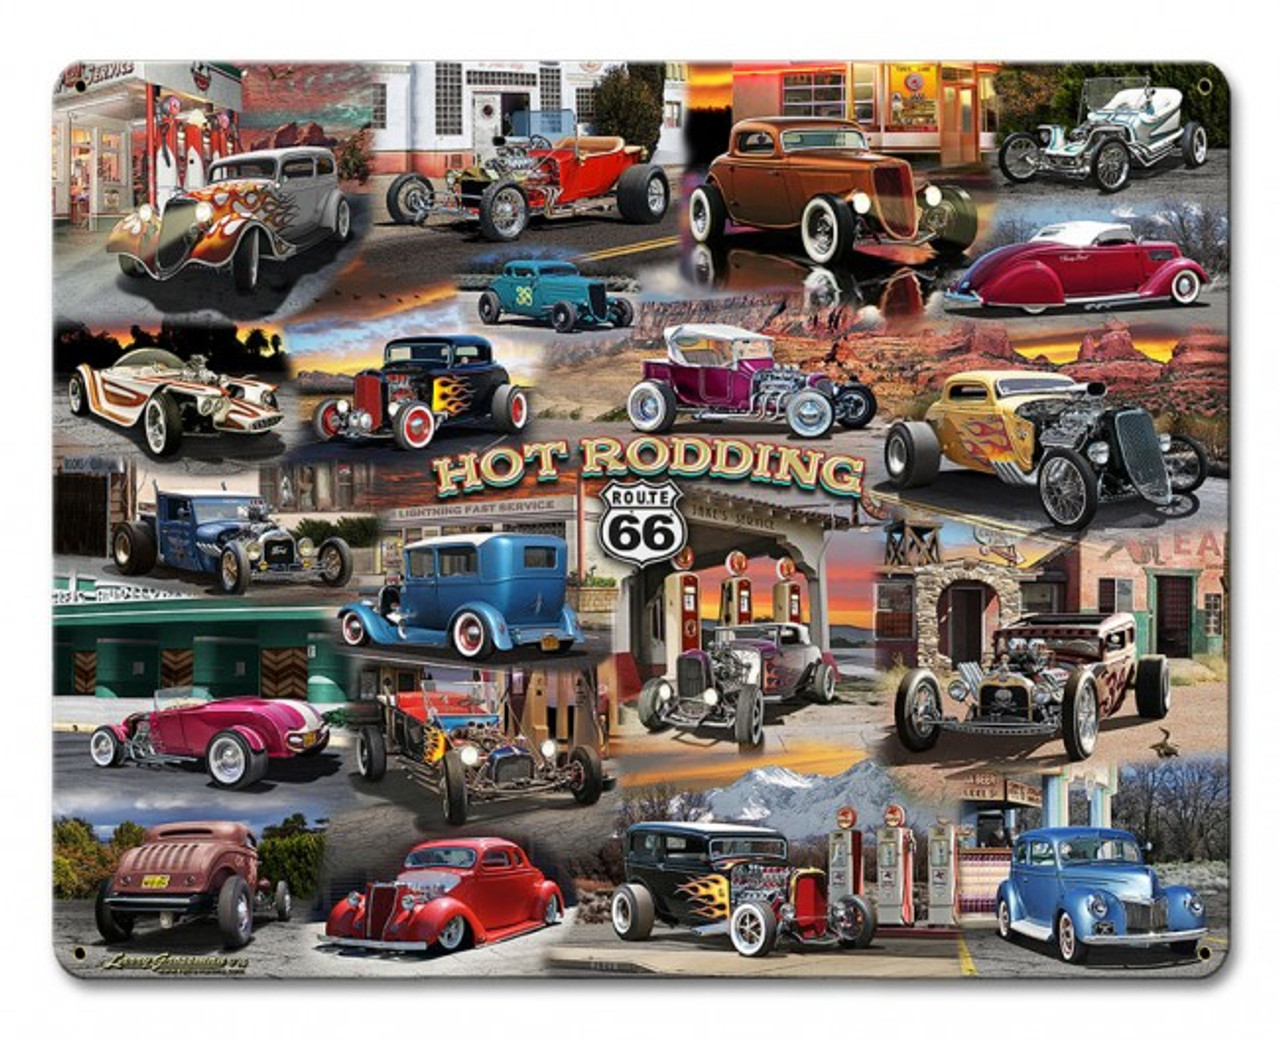 Hot Rod Collage Metal Sign 15 x 12 Inches